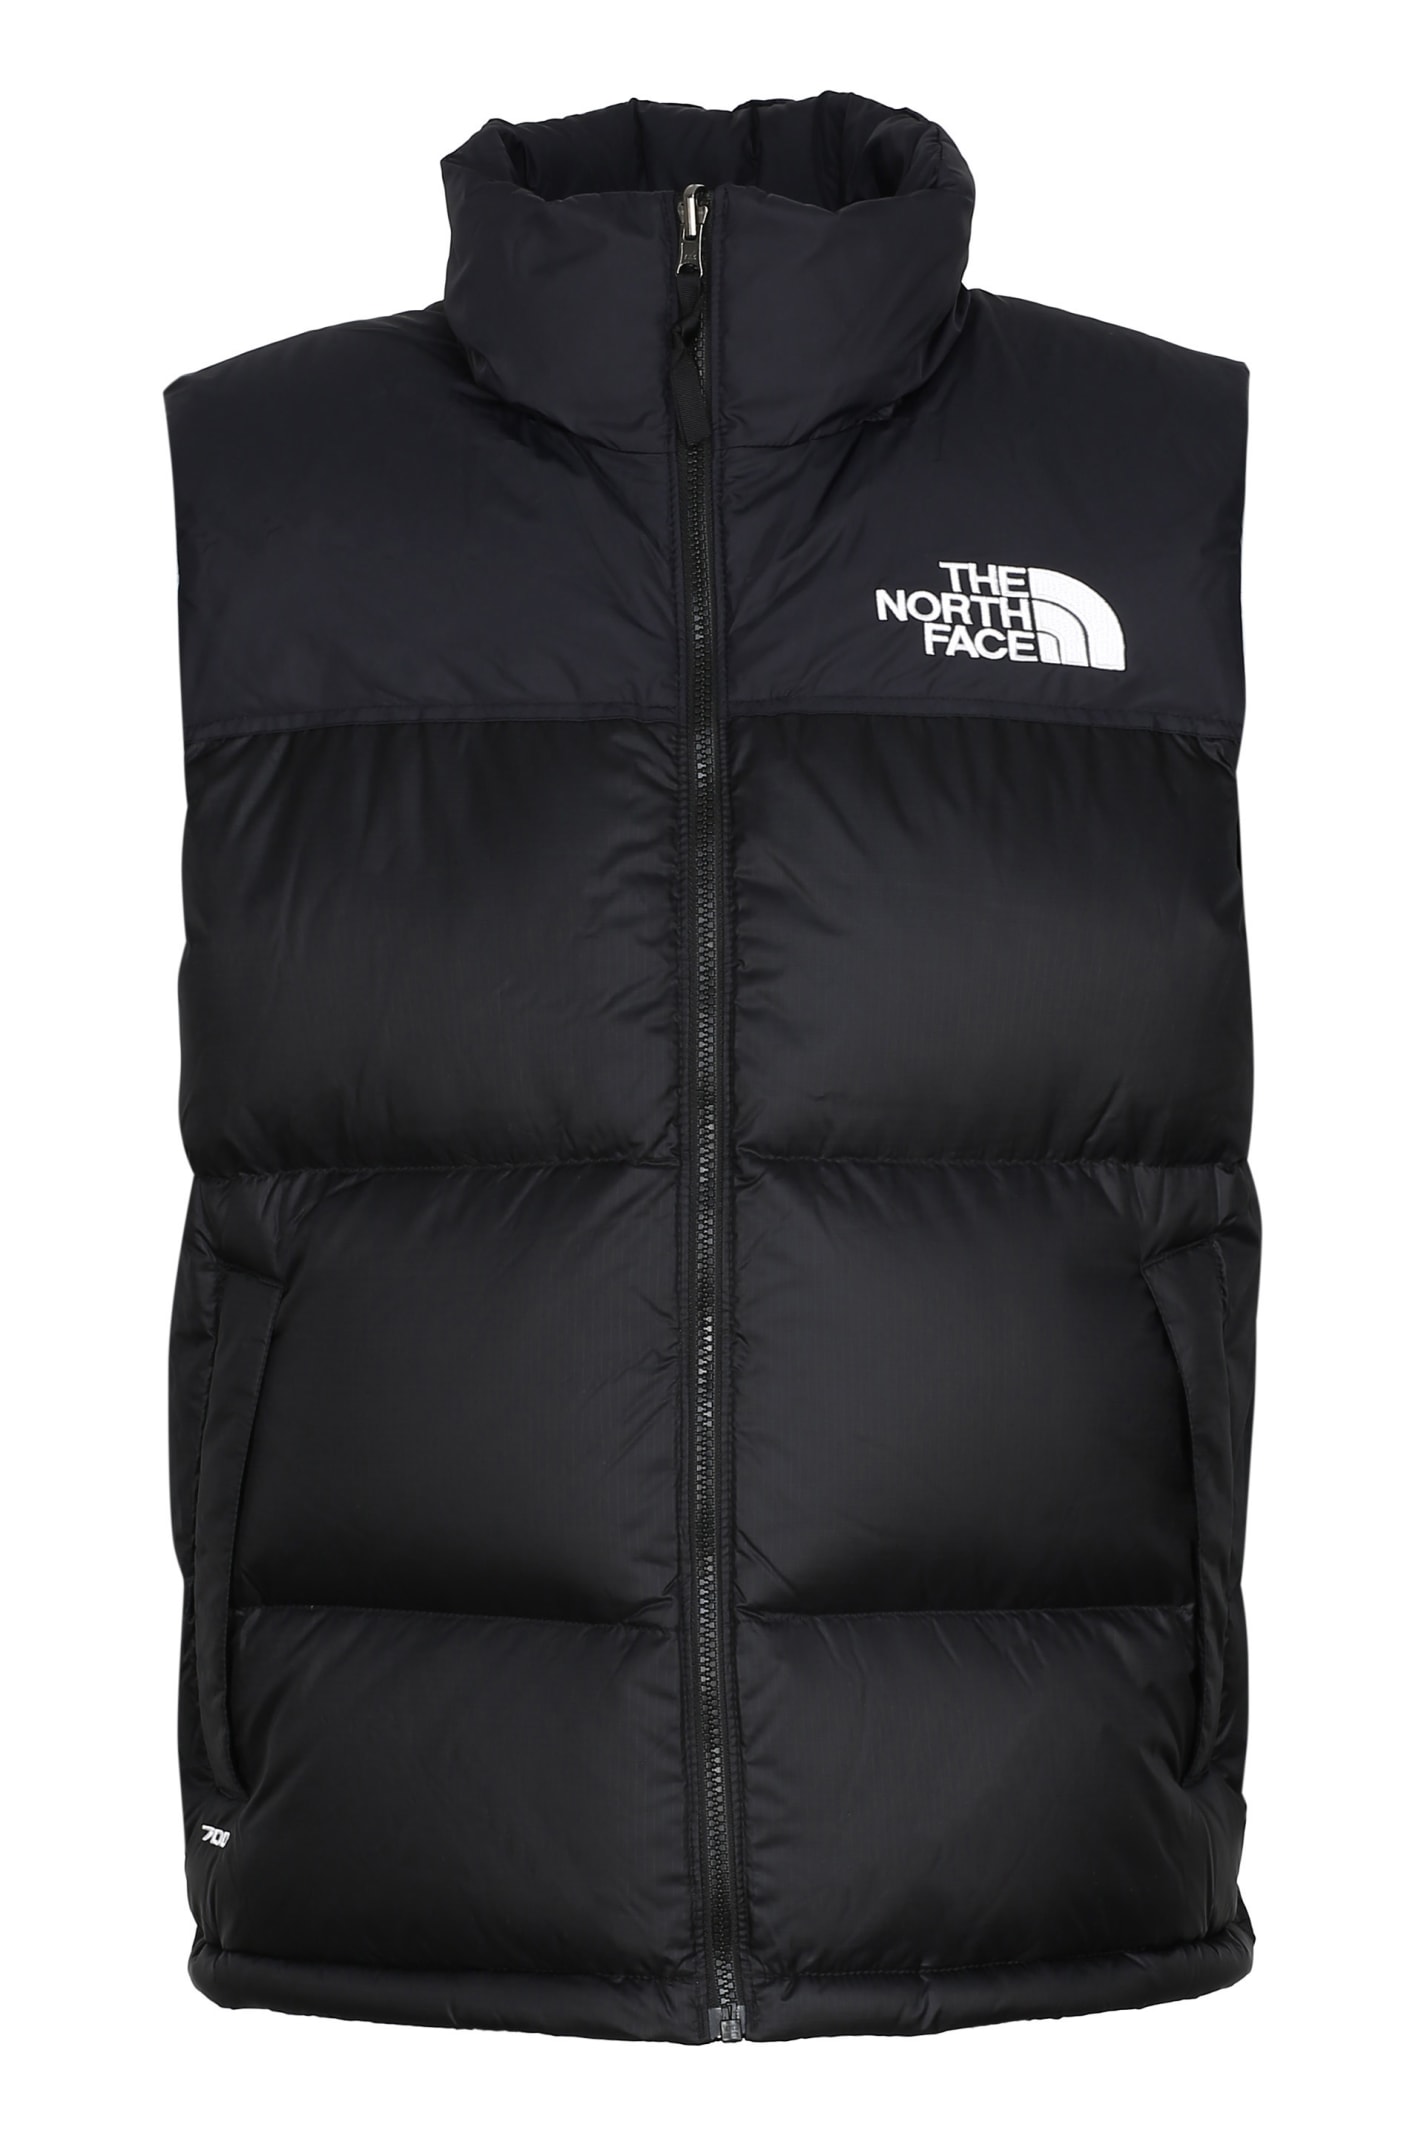 body warmer the north face Online 